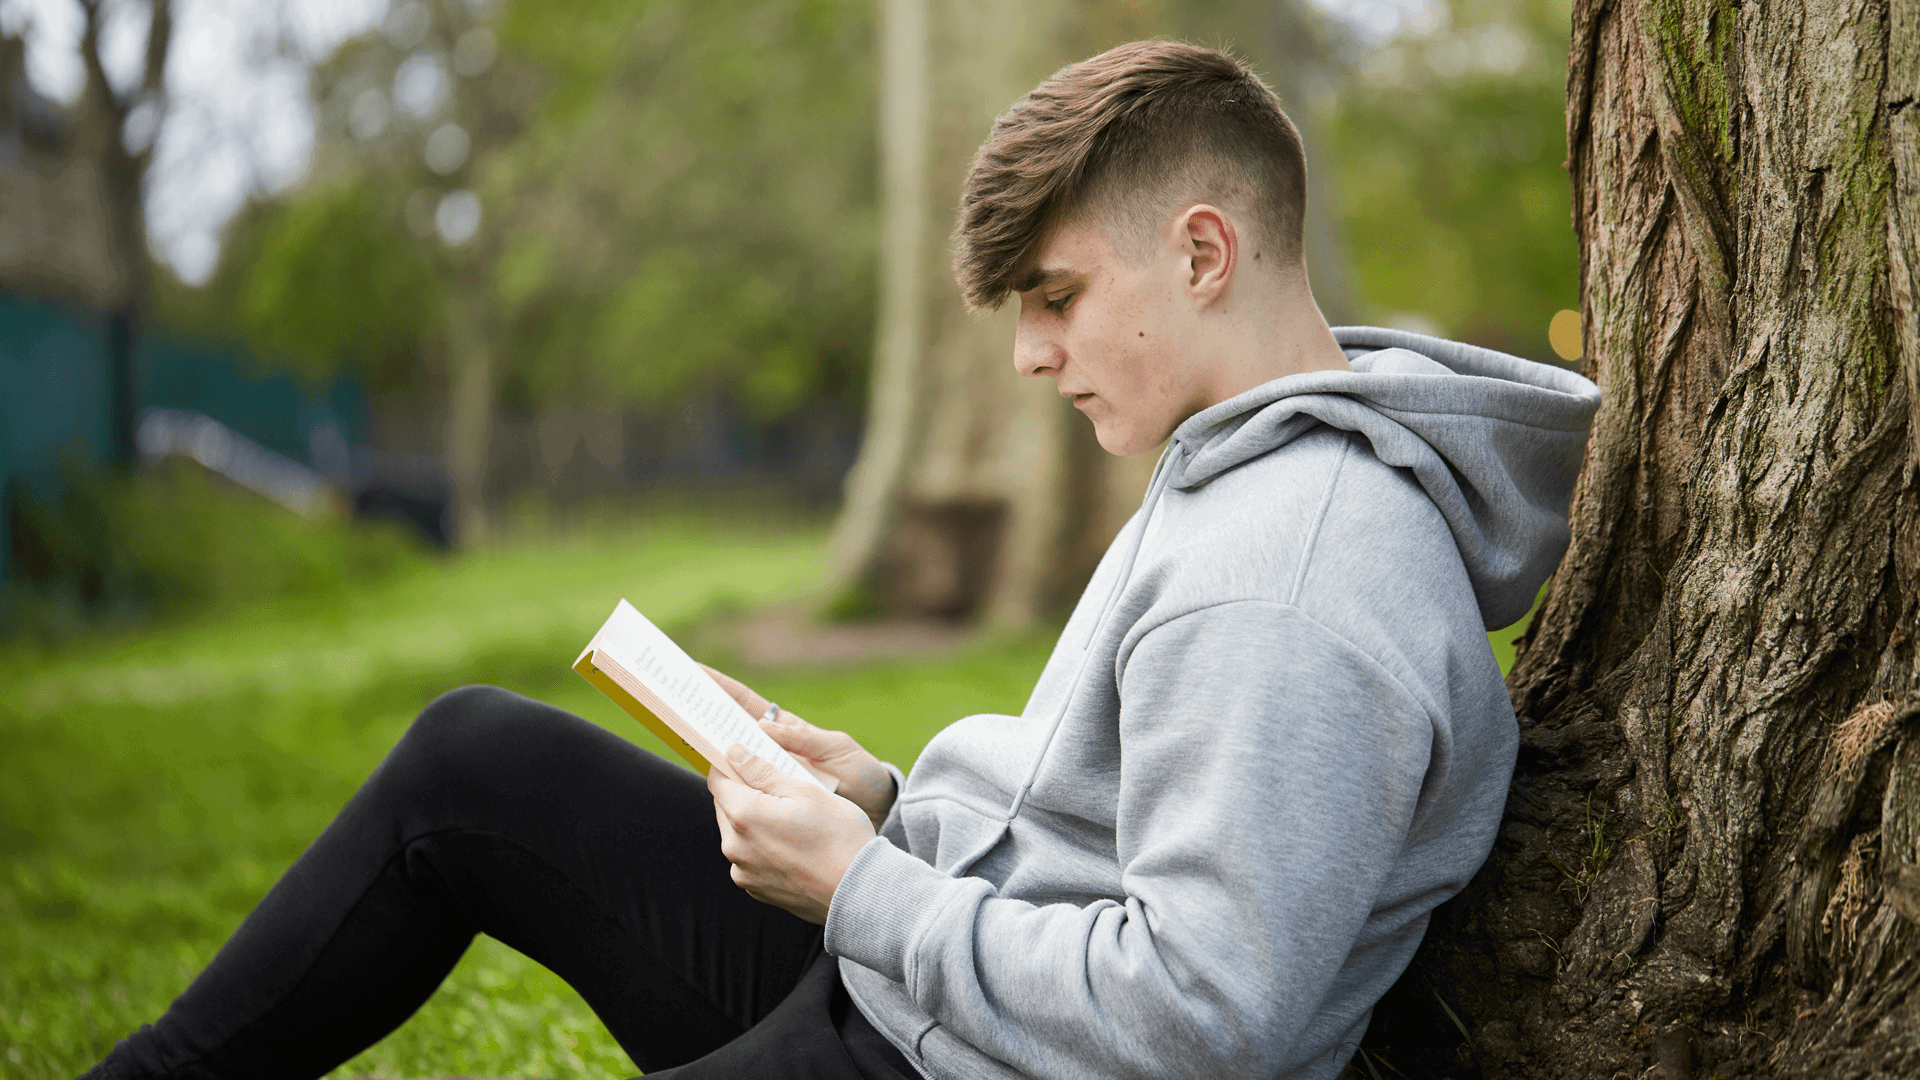 A young person sits against a tree in the park while reading a book.